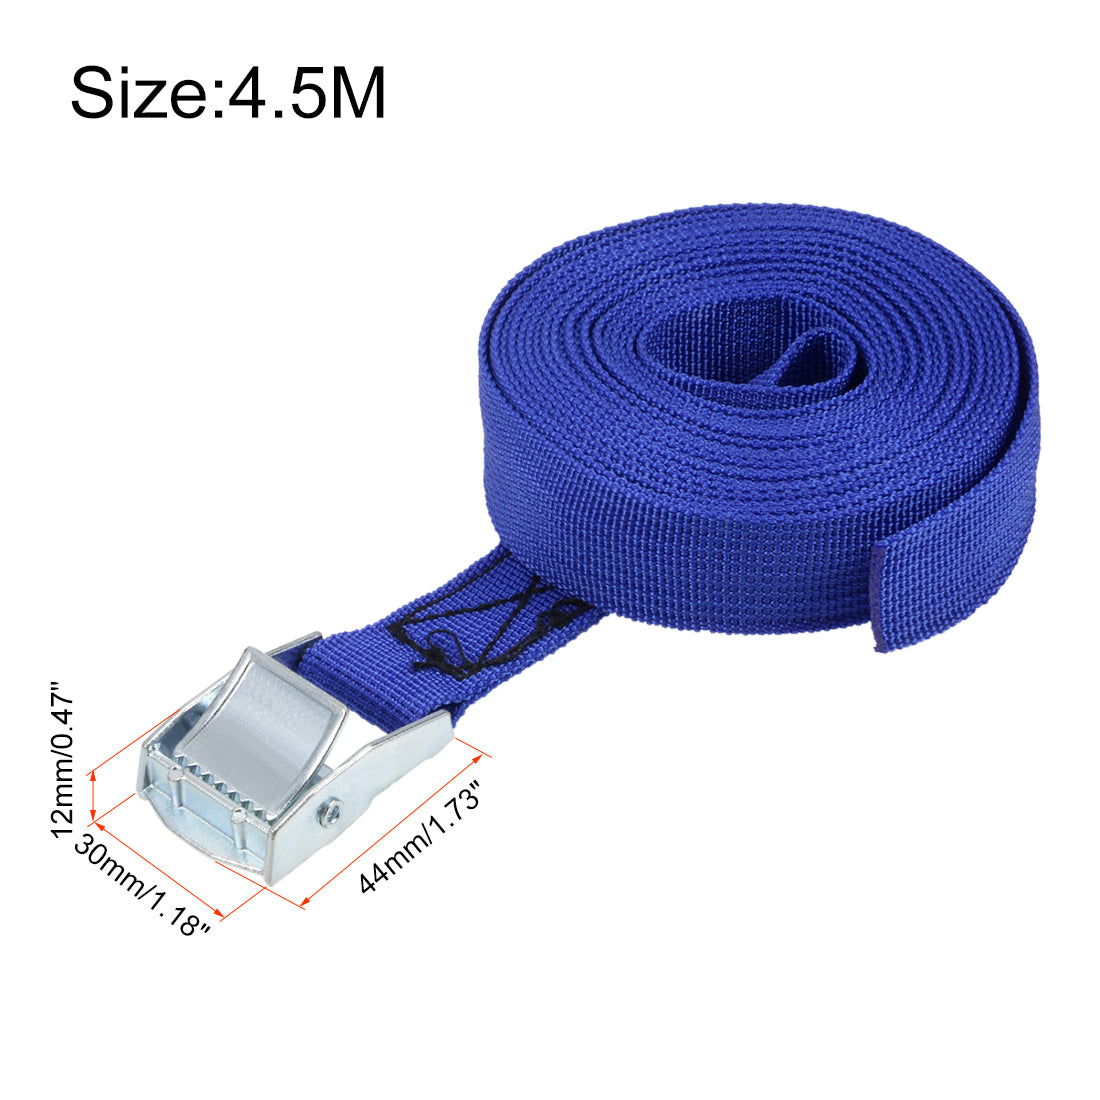 uxcell Uxcell 4M x 25mm Lashing Strap Cargo Tie Down Straps w Cam Lock Buckle 250Kg Work Load, Blue, 2Pcs